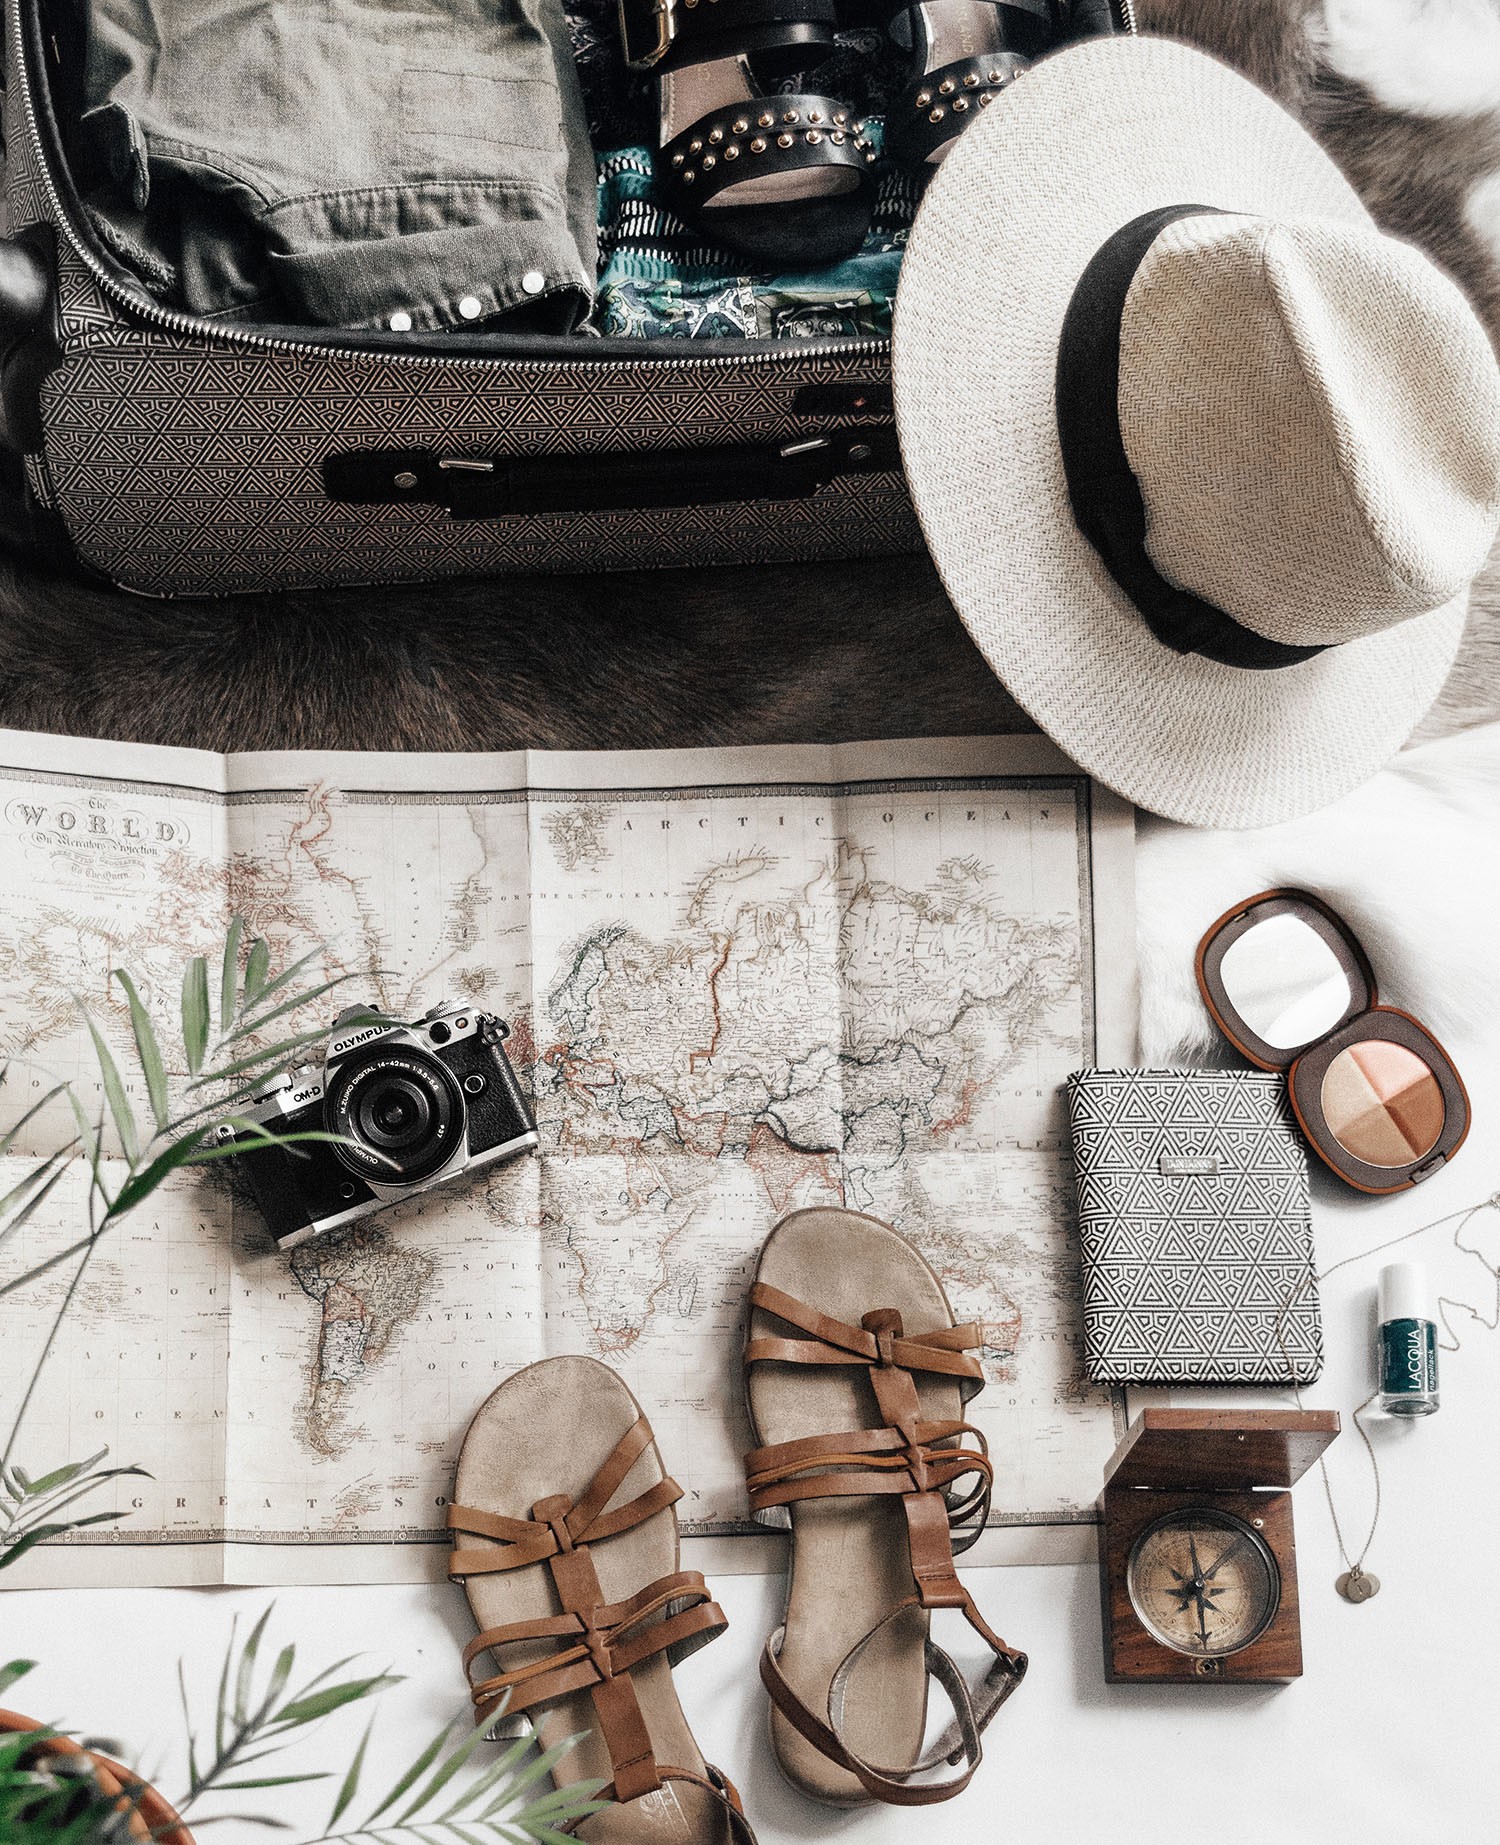 Carry-On Essentials for Long-Haul Flights